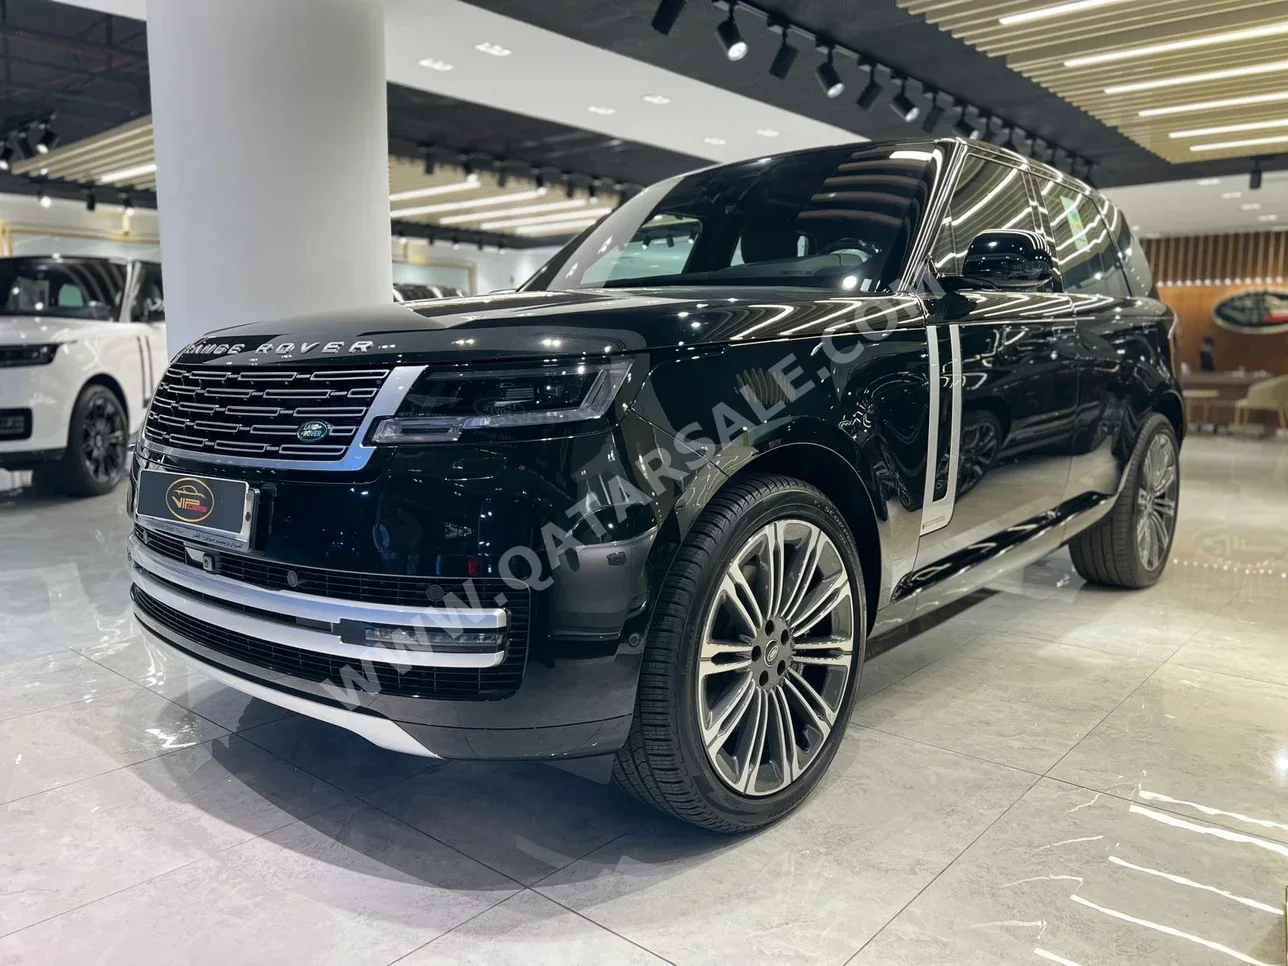 Land Rover  Range Rover  Vogue  Autobiography  2023  Automatic  0 Km  8 Cylinder  Four Wheel Drive (4WD)  SUV  Black  With Warranty